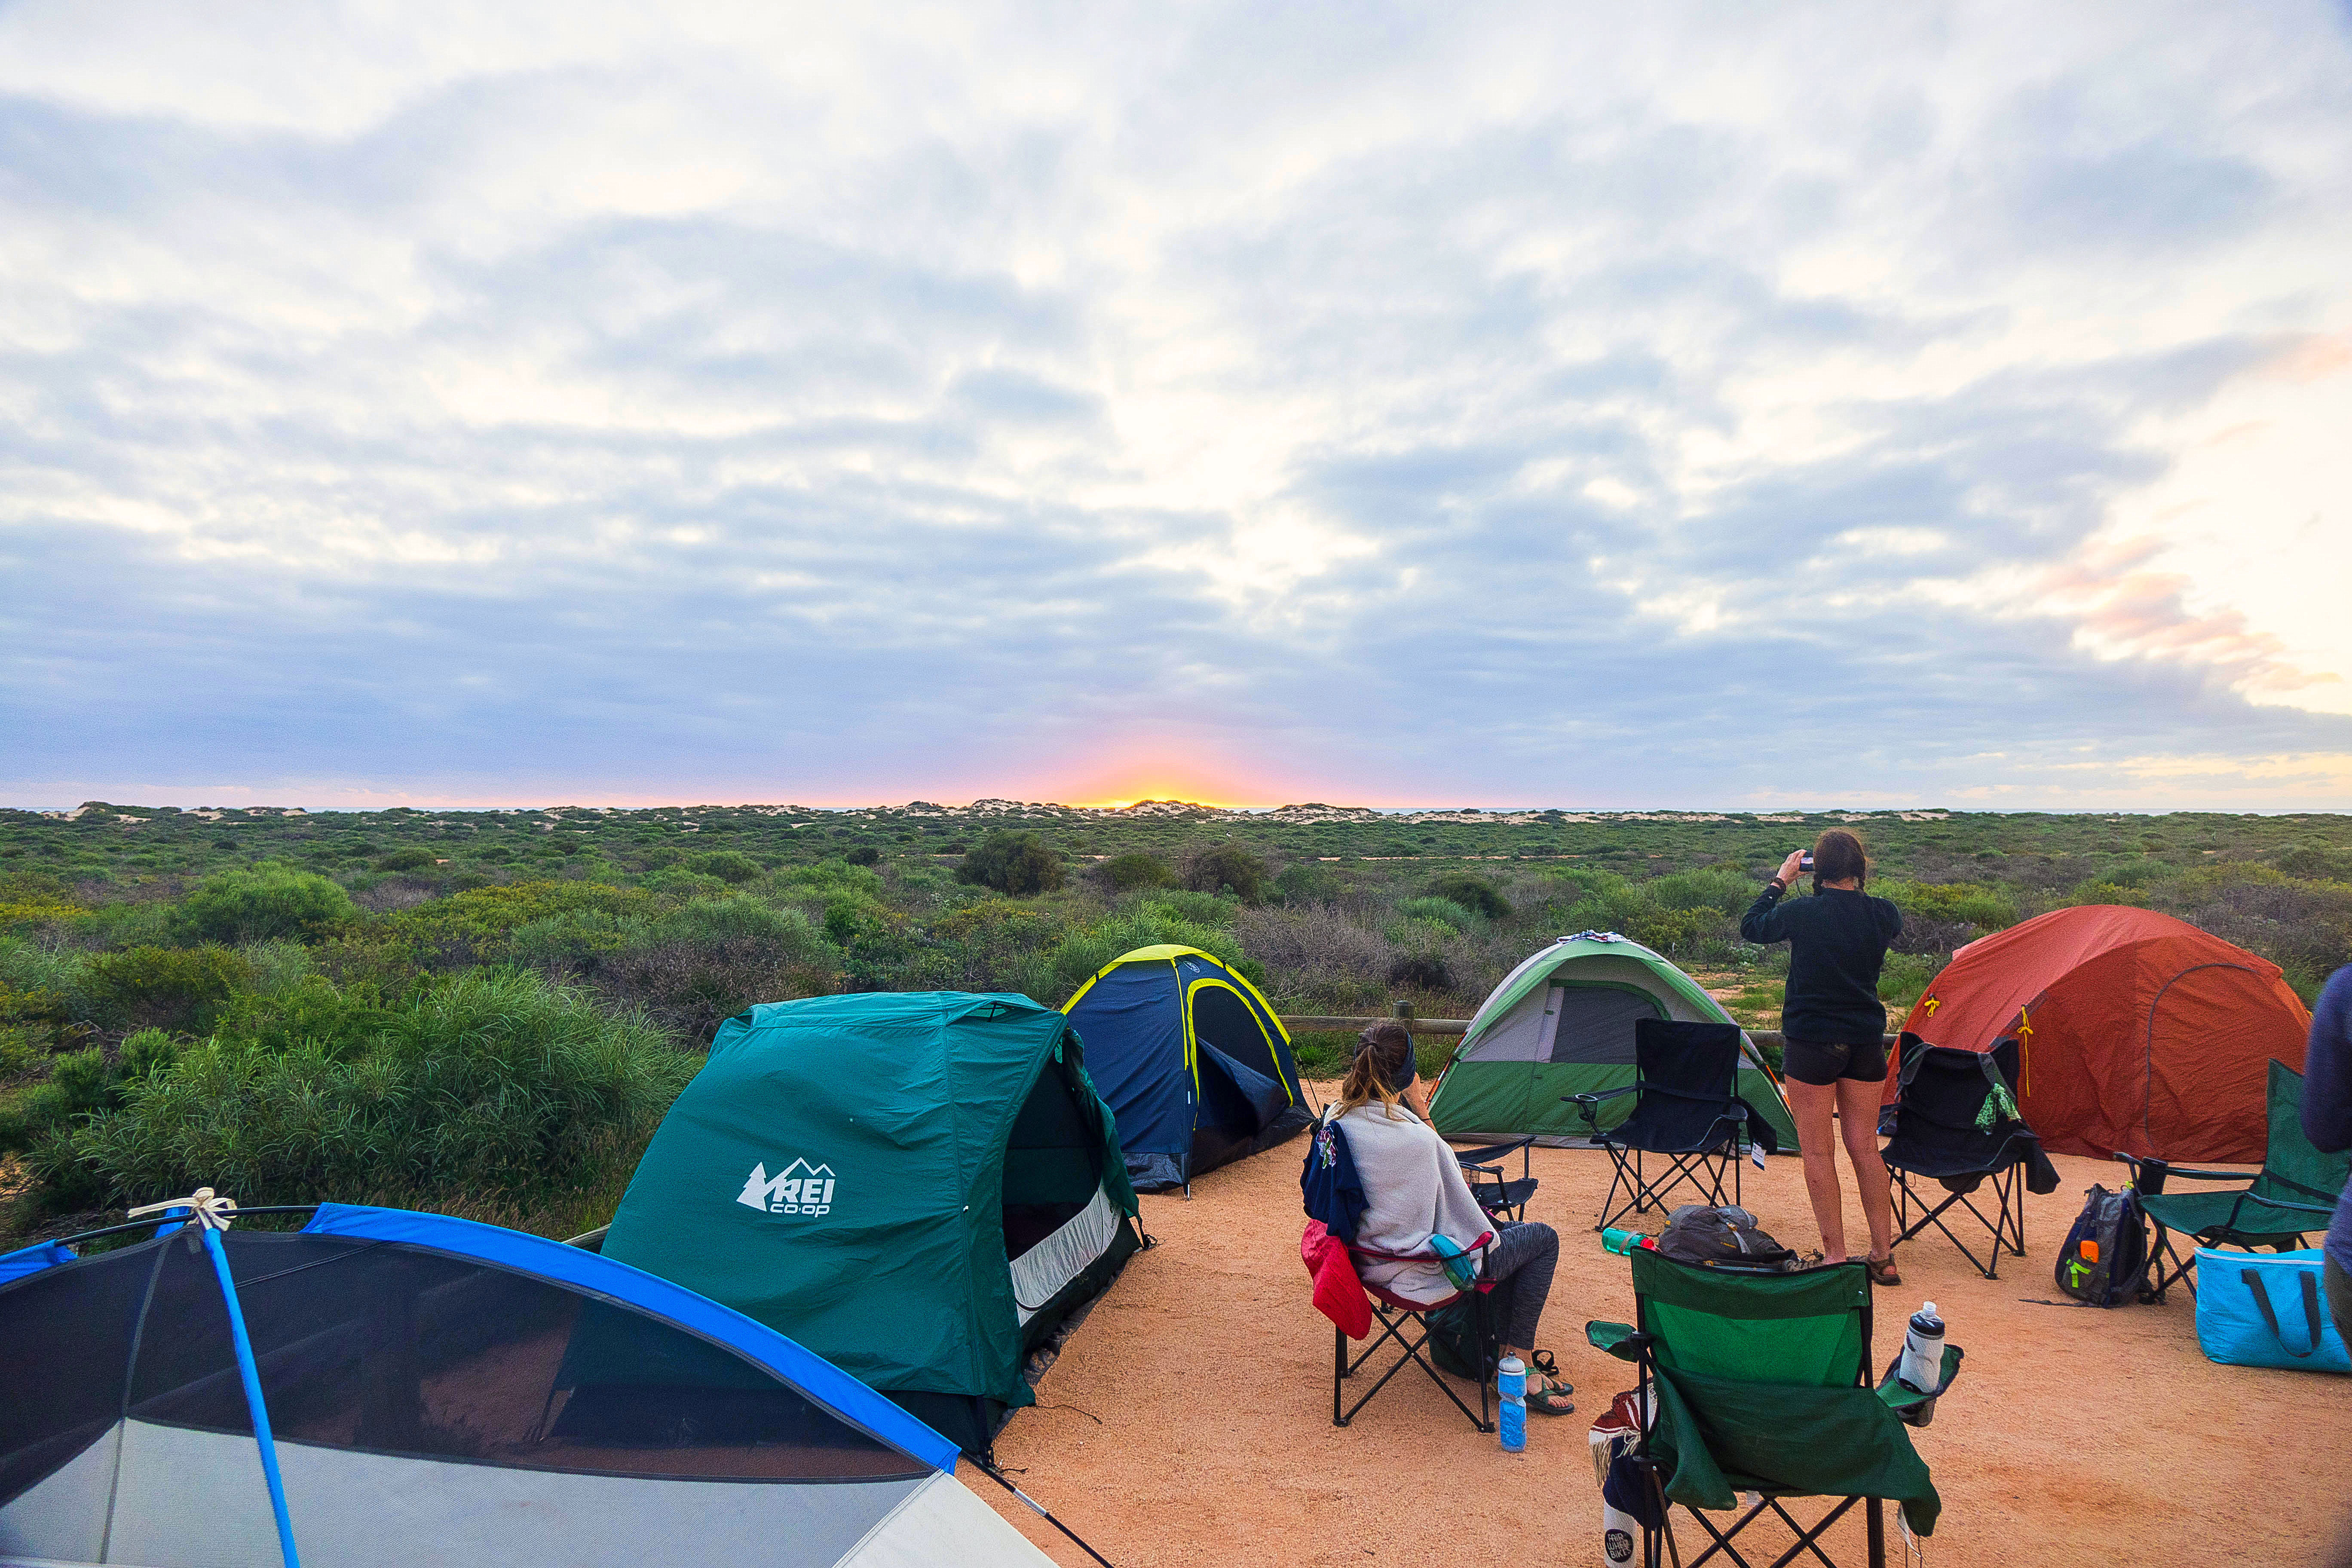 Students camping during study abroad in Australia 